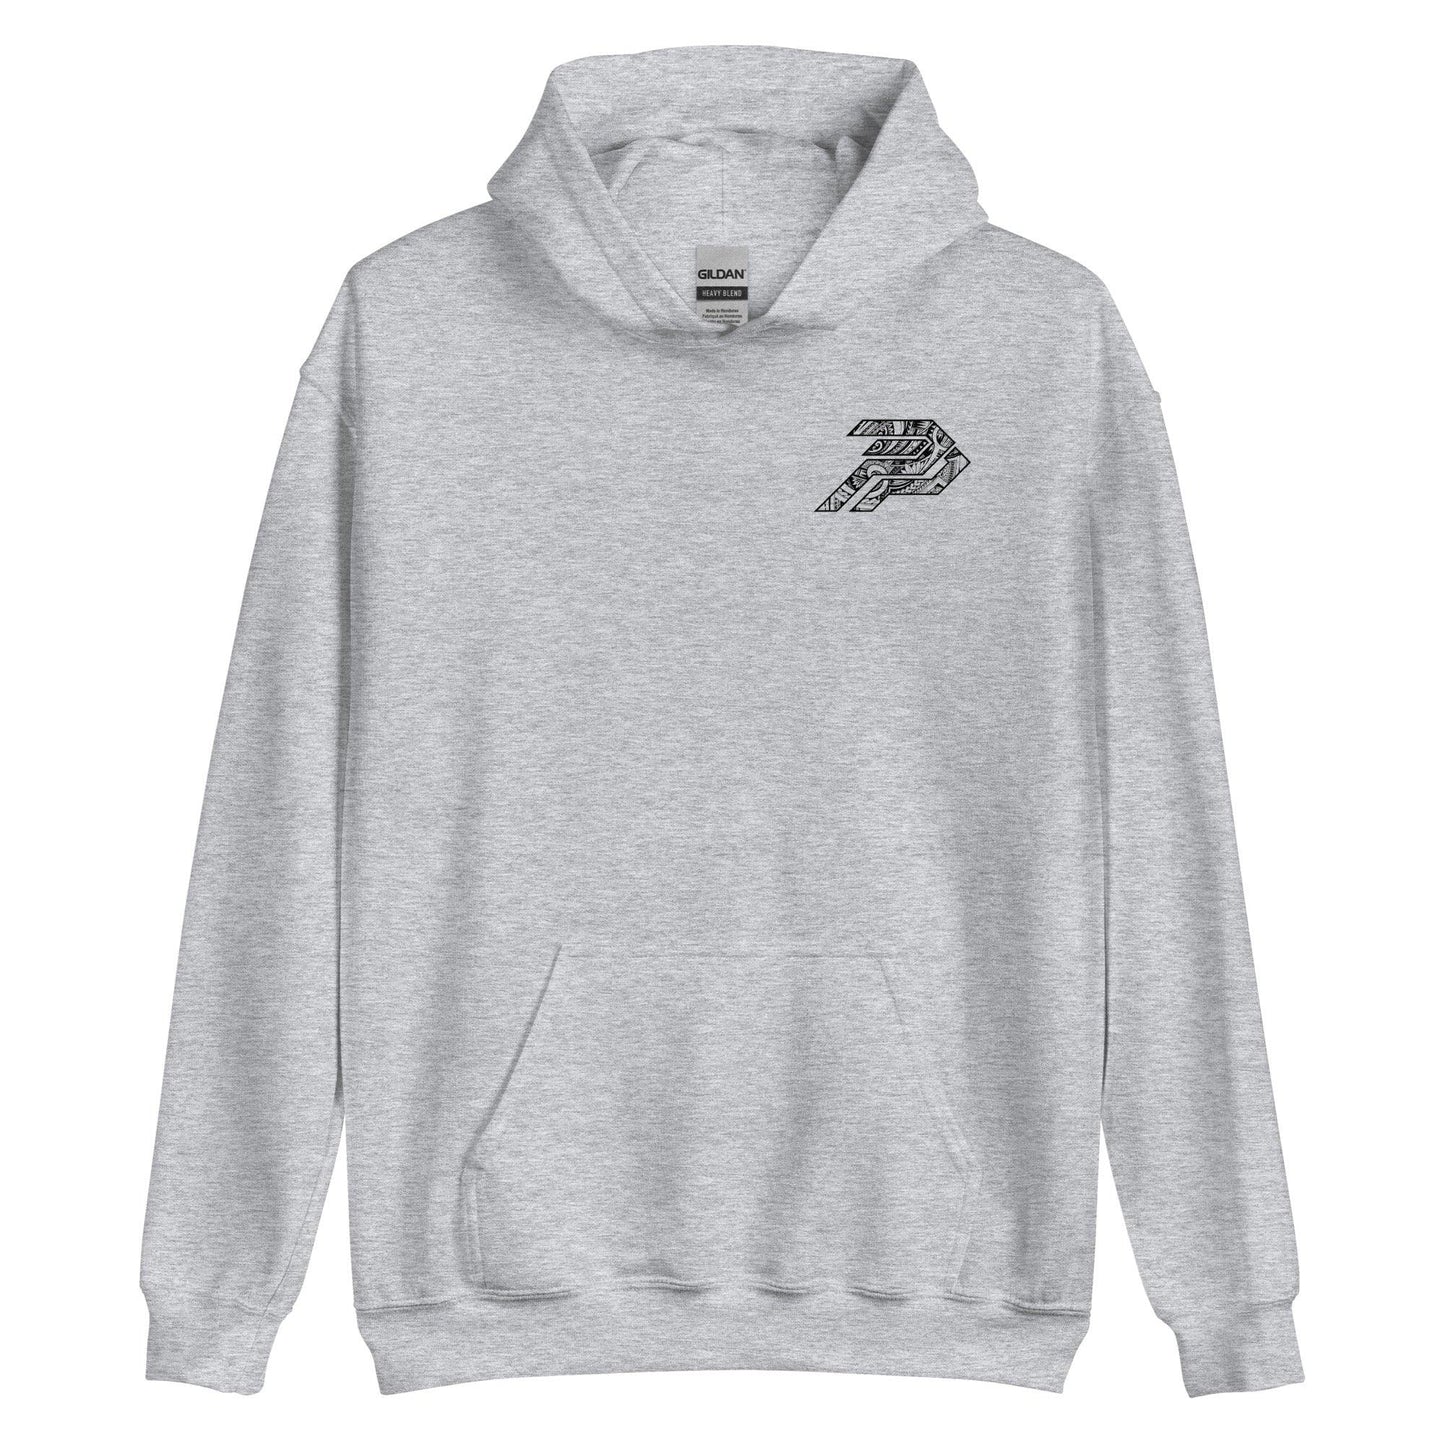 Phill Paea "Homegrown" Hoodie - Fan Arch